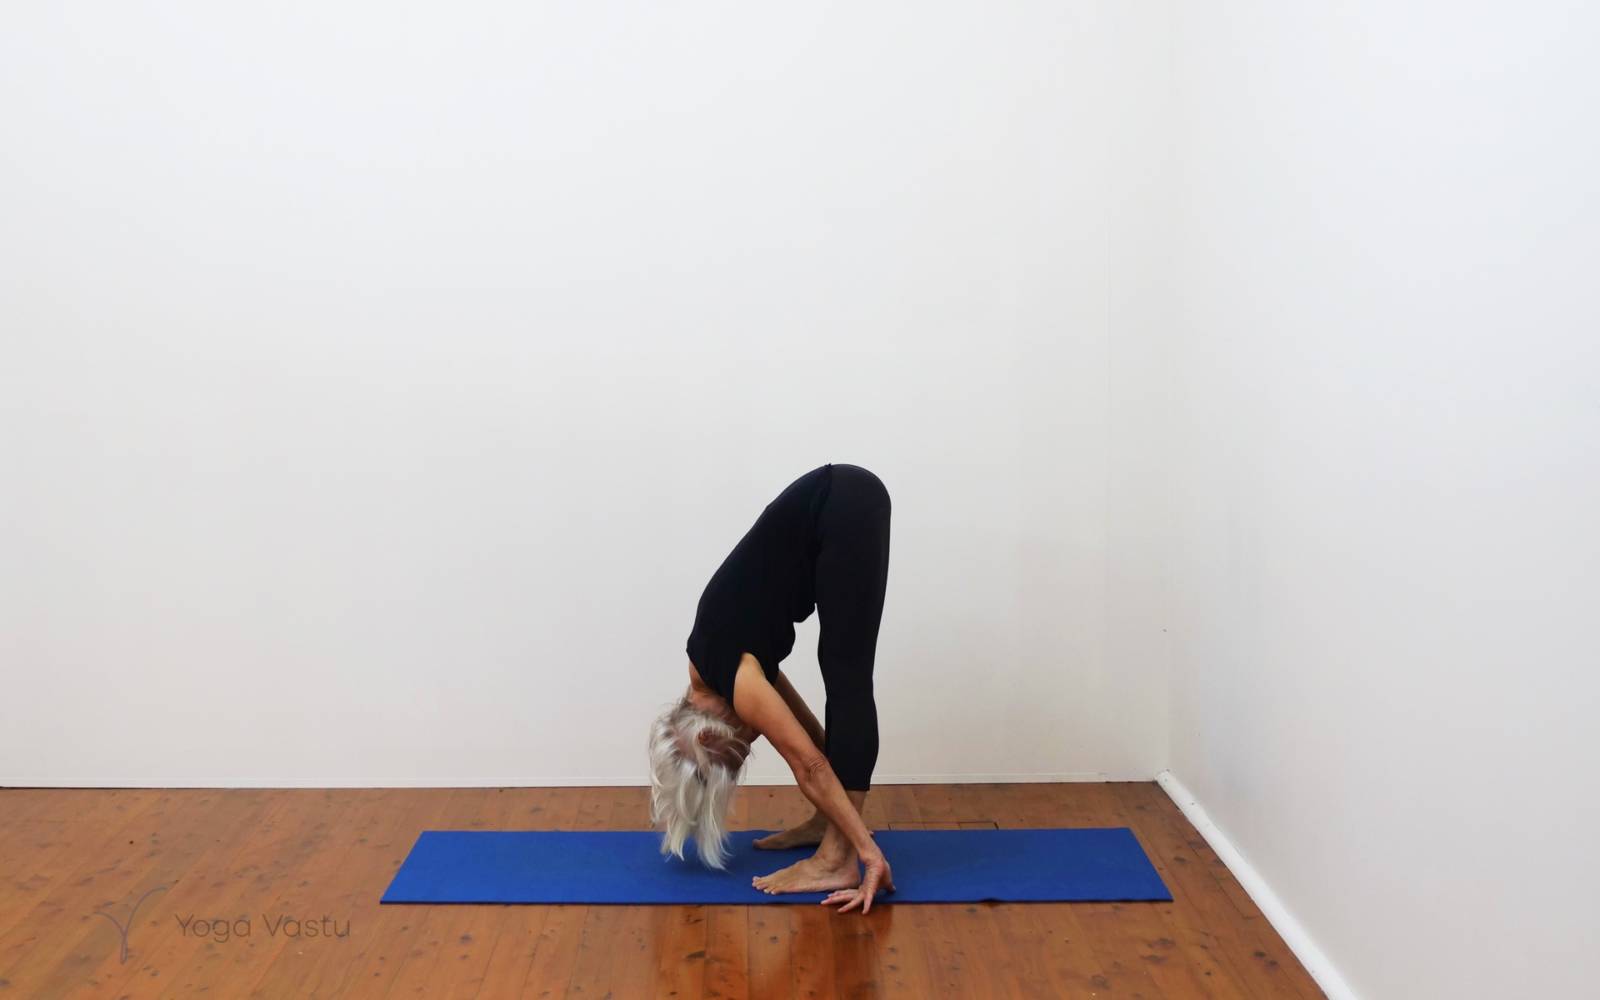 Standing poses with wall variations. Explore new ways of approaching the standing  pose asana group. This class uses a wall to aid balance